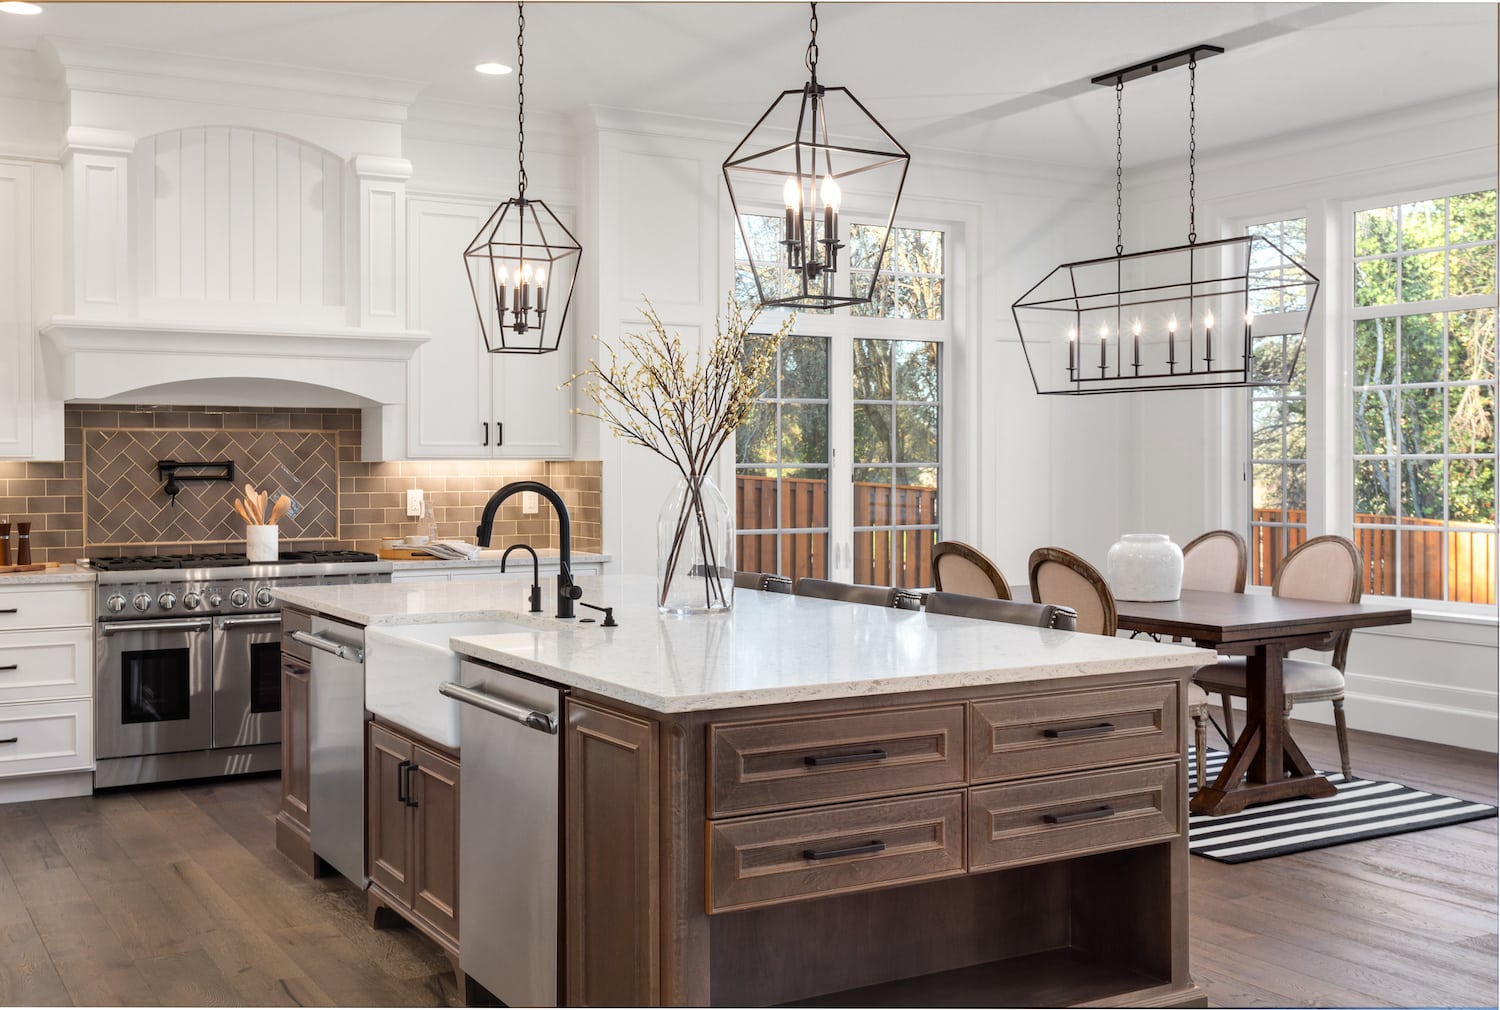 A kitchen with white cabinets and a center island, designed by Grimes.